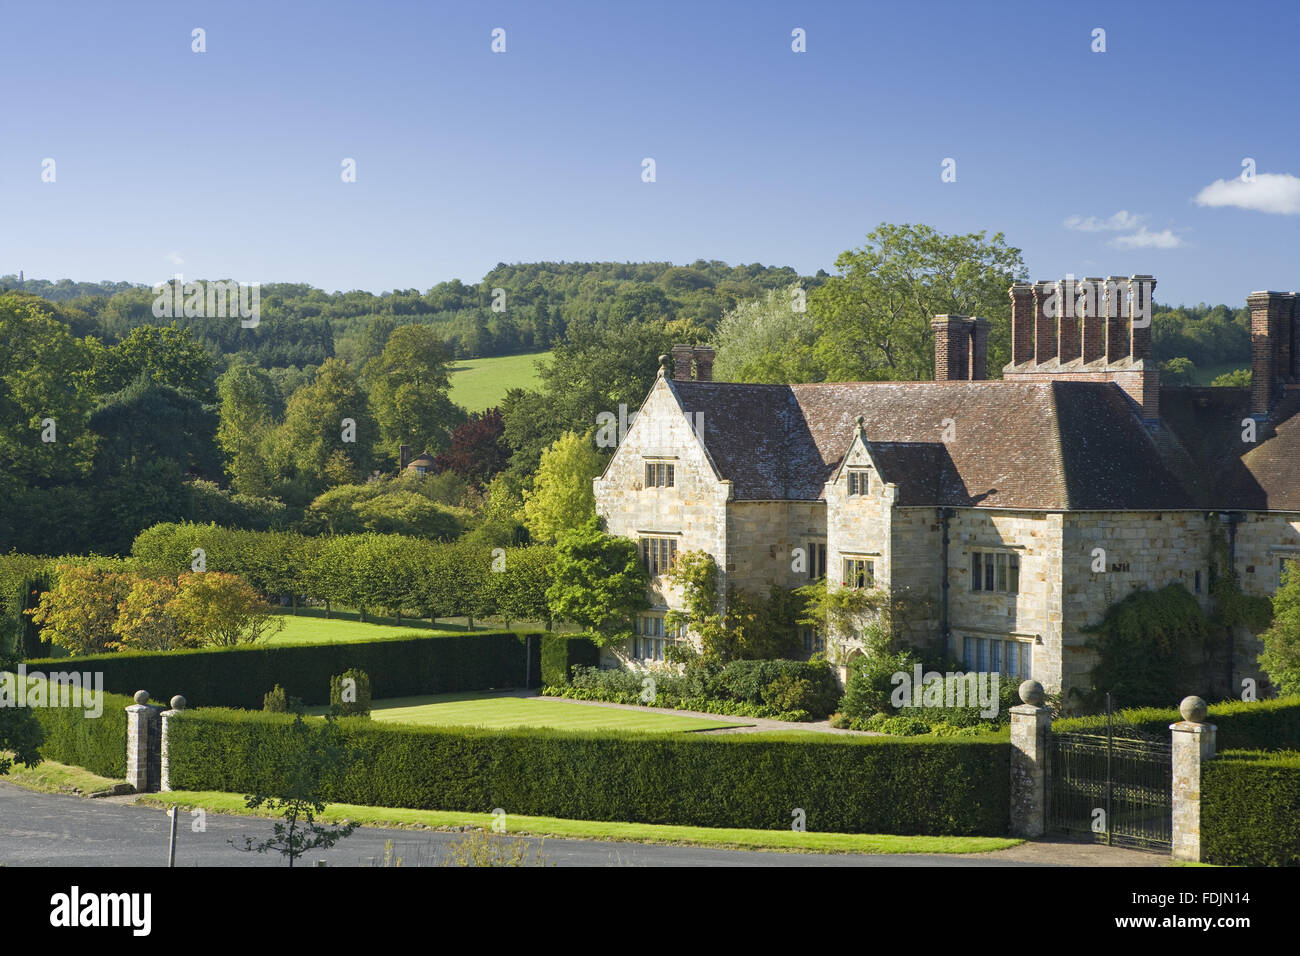 Bateman's, the Jacobean house that was the home of Rudyard Kipling from 1902 to 1936, set in its garden in the countryside at Burwash, East Sussex. Stock Photo